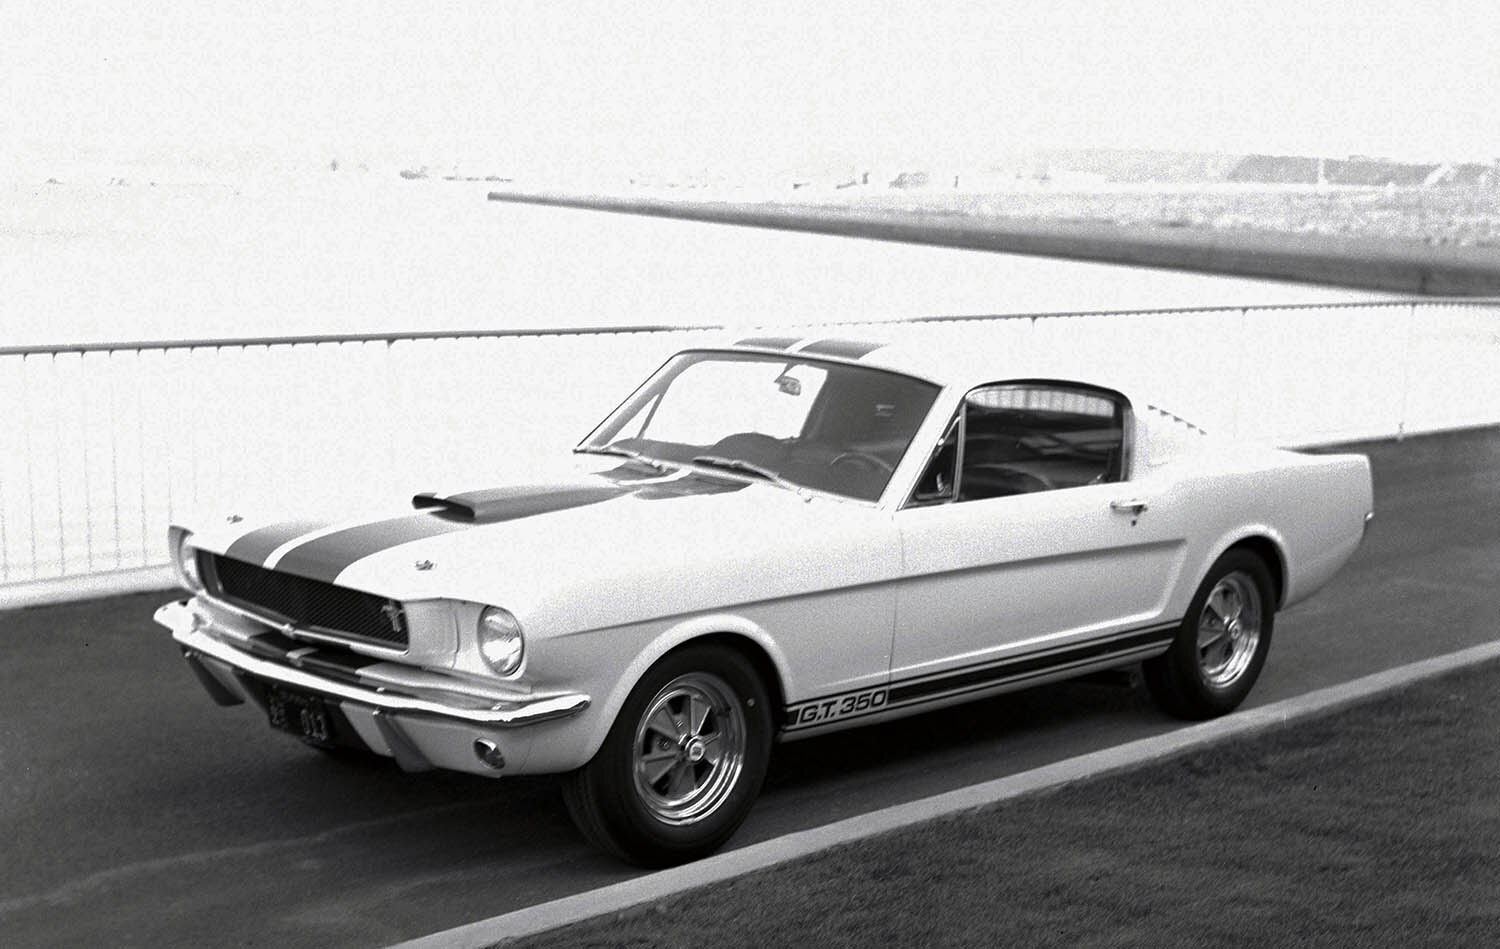 An early Ford Mustang Shelby GT350